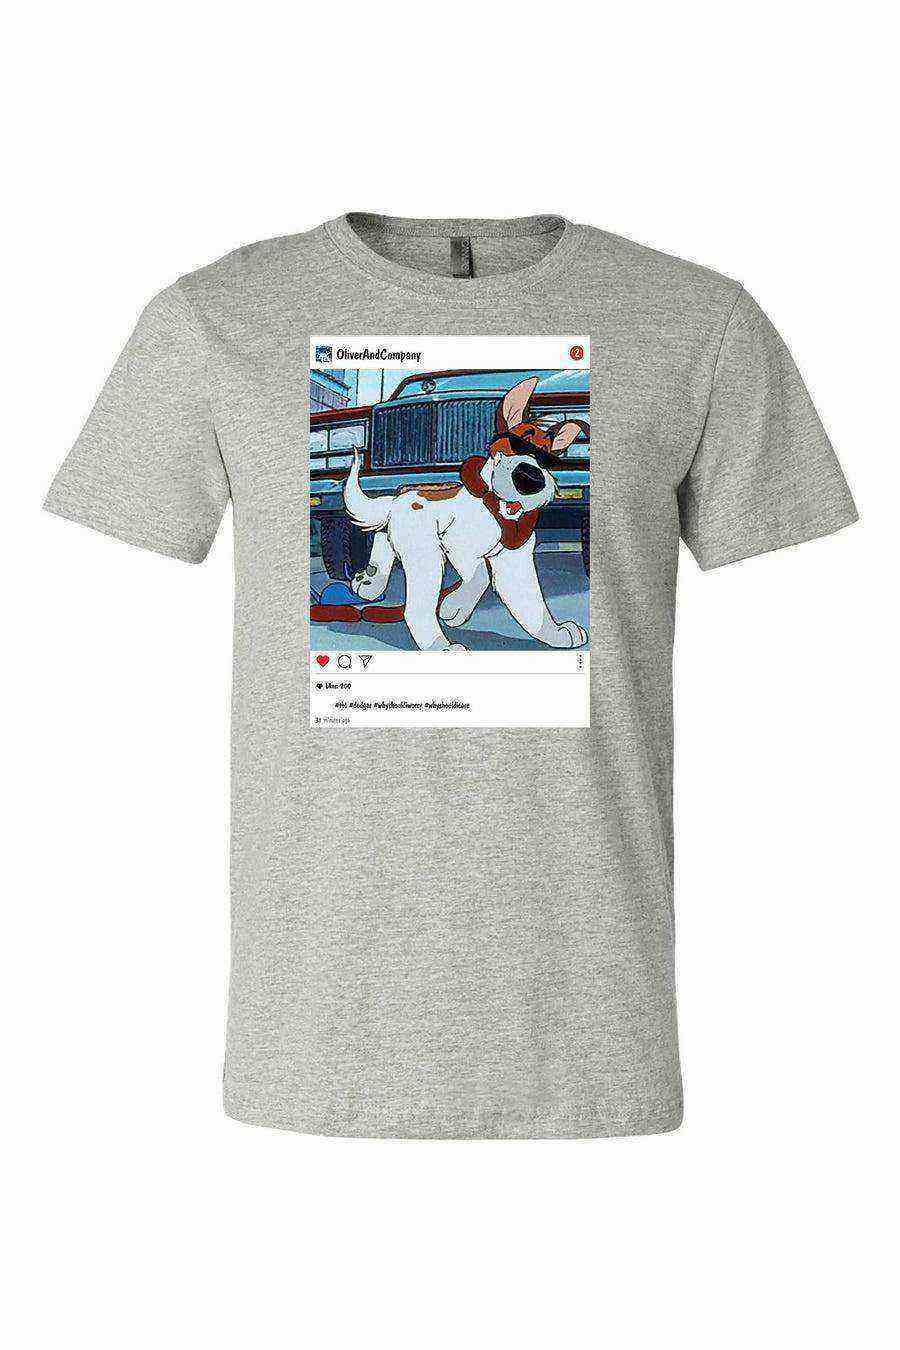 Toddler | Insta Throw Back Shirt | Oliver And Company - Dylan's Tees